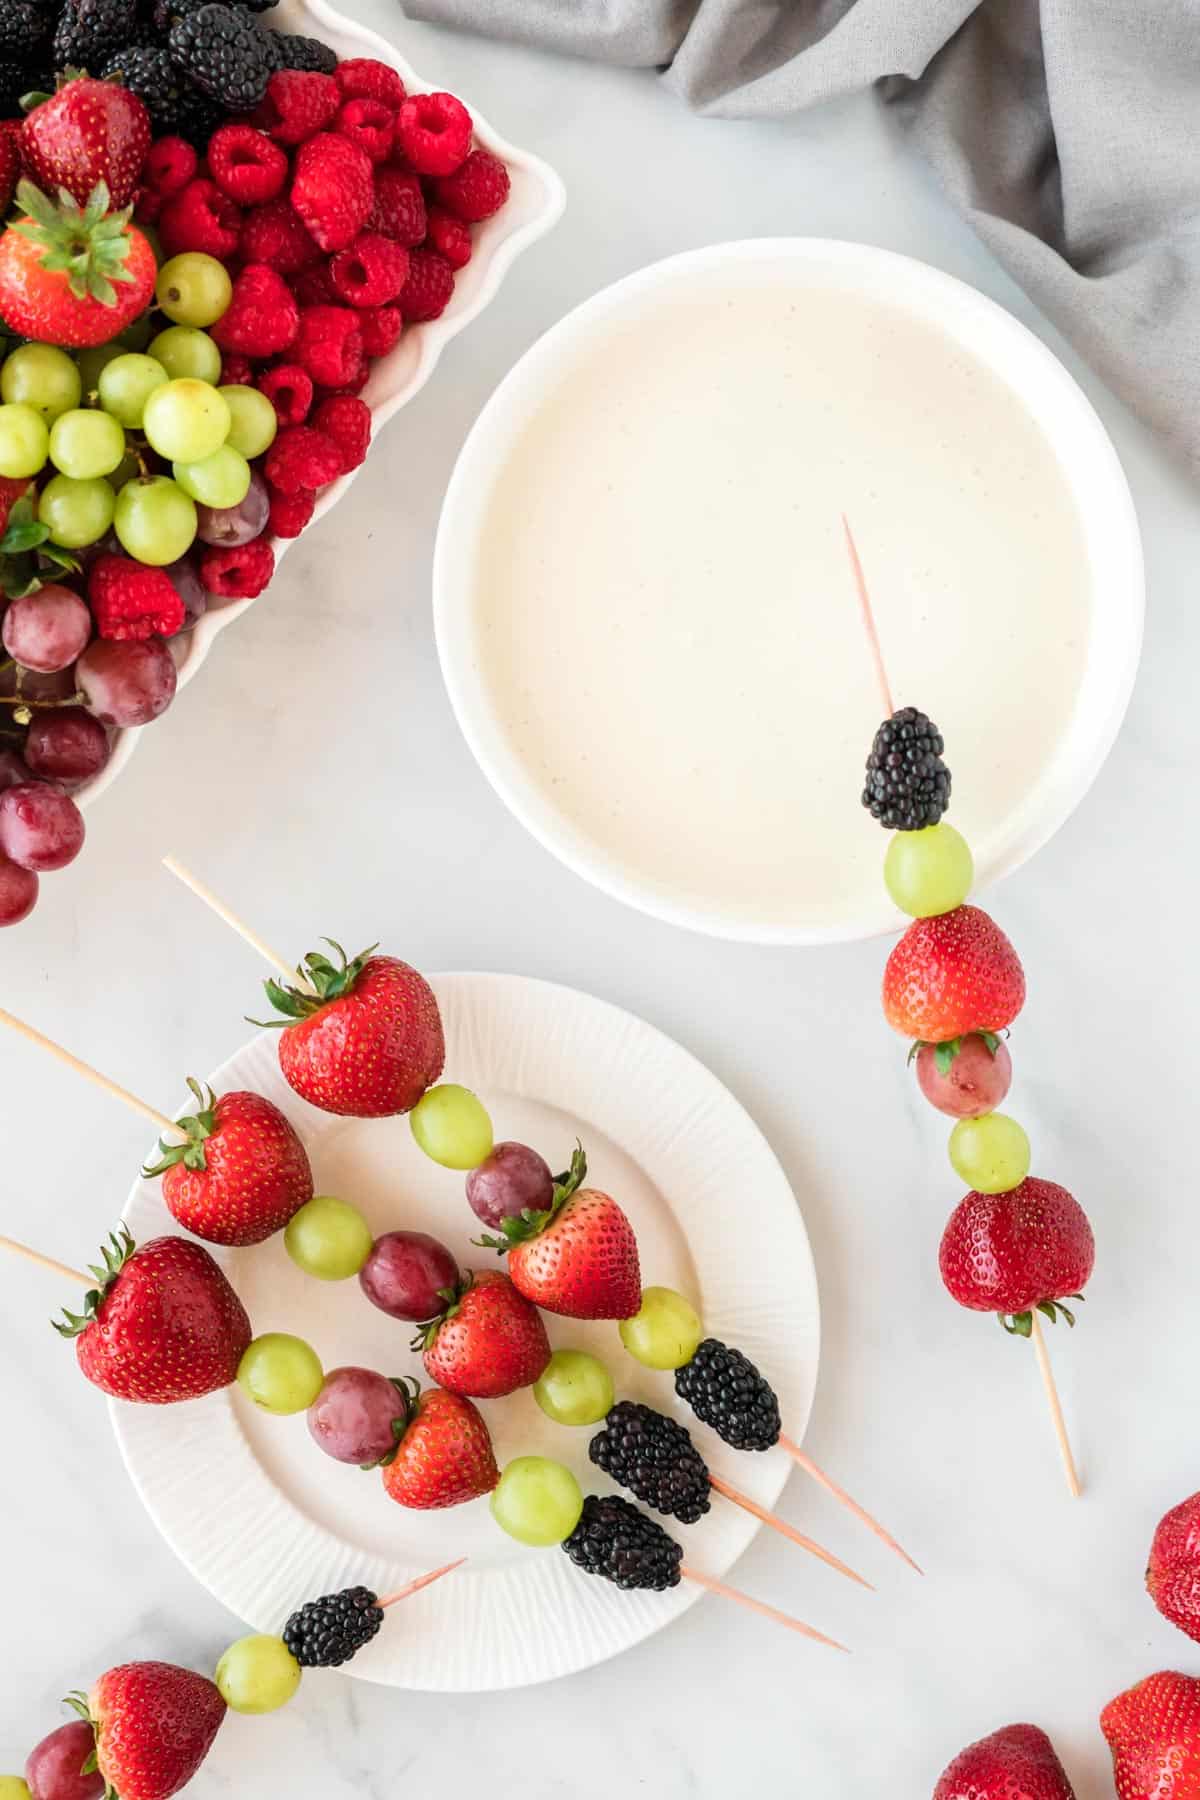 fruit skewers with strawberries, grapes, and blackberries with a bowl of fruit dip